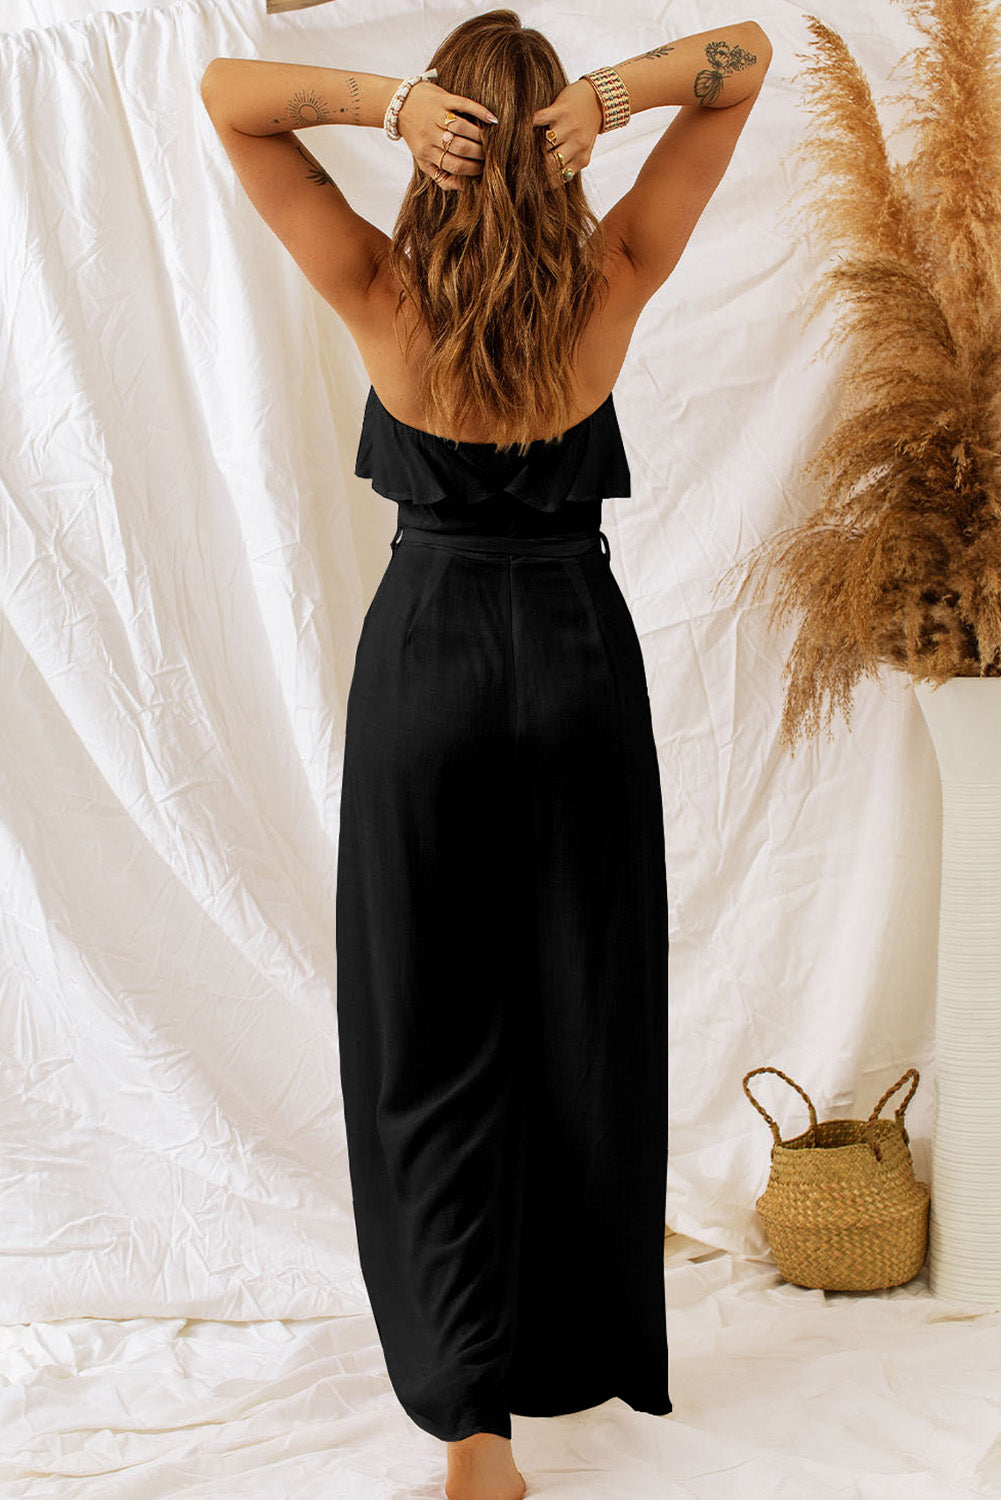 Sexy strapless bandeau silhouette with ruffle overlay, attached belt, and wide leg bottoms. Made with viscose and linen fabric blend.